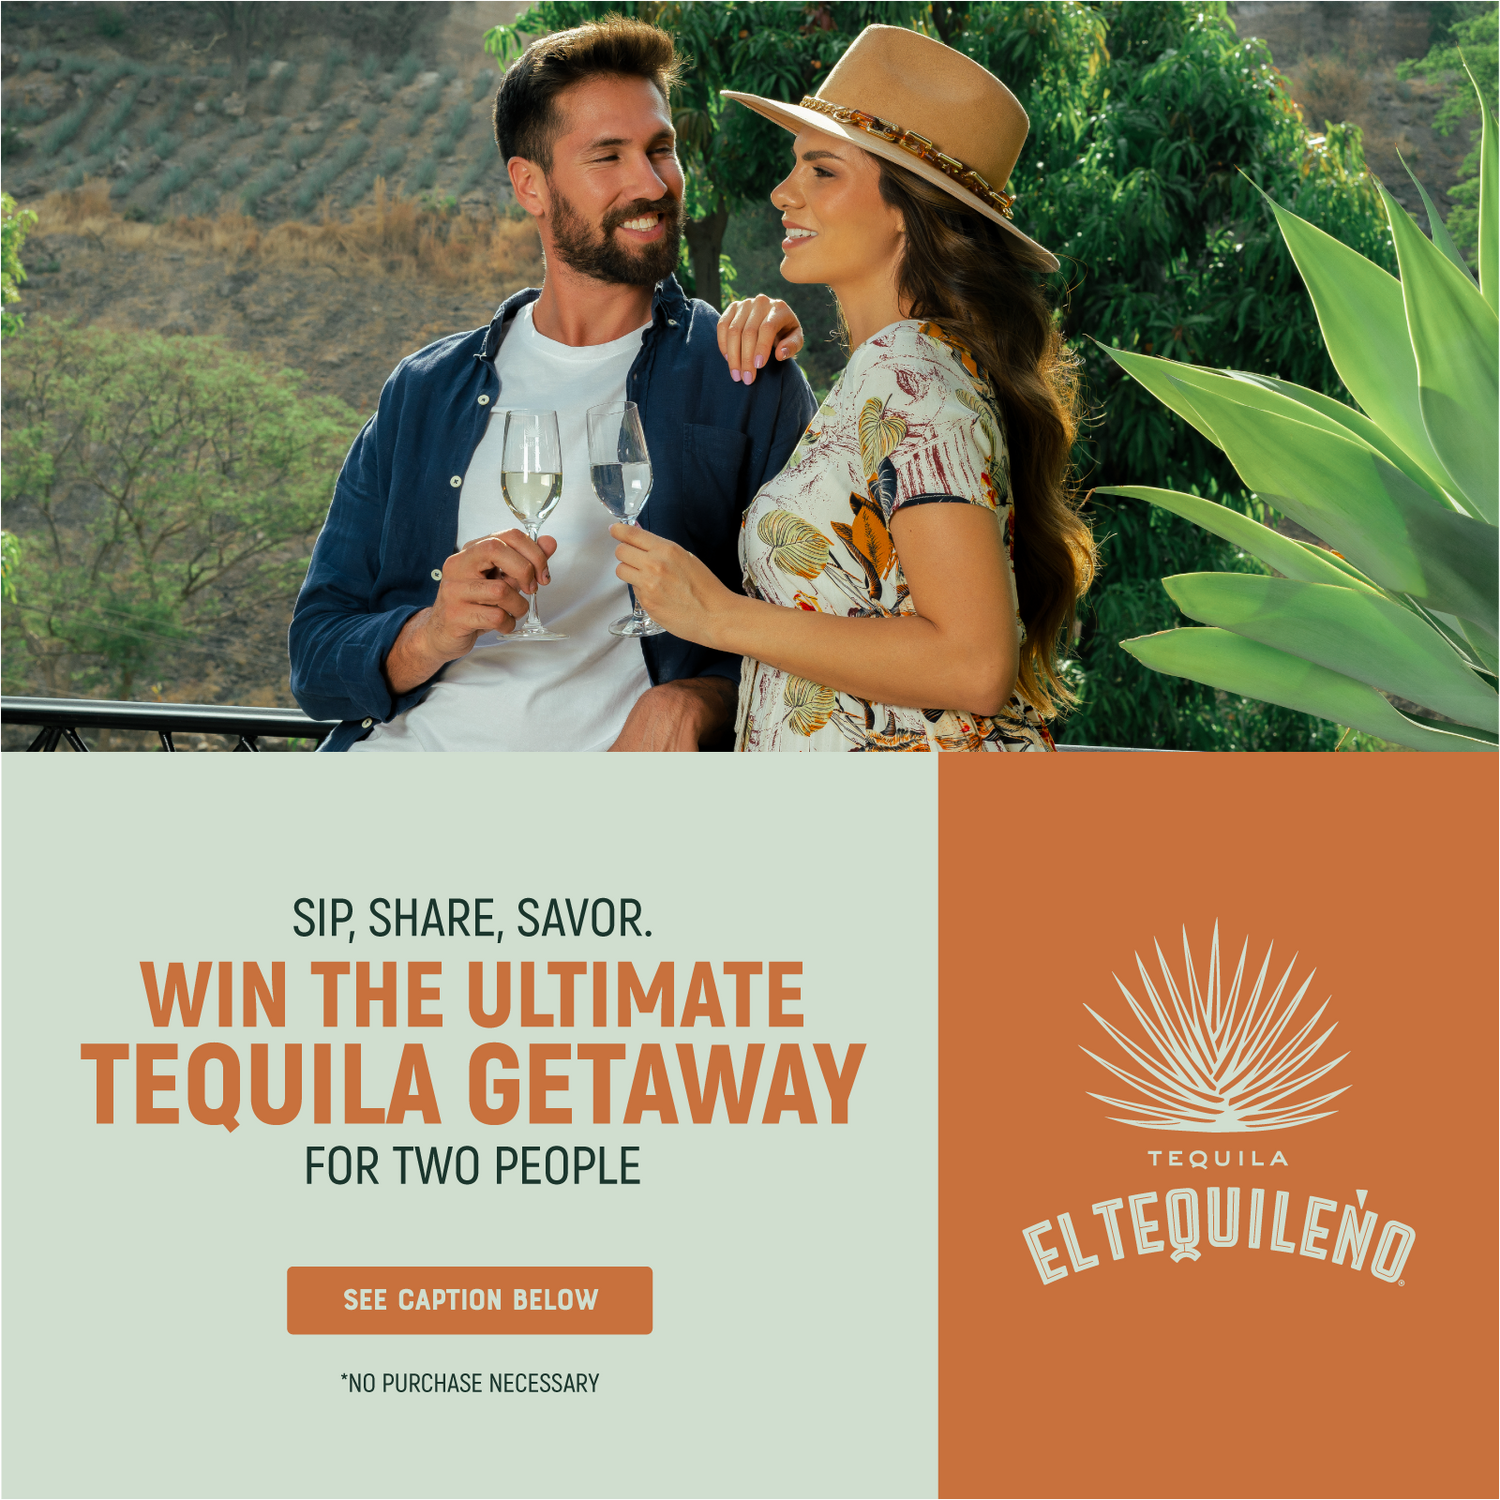 Win The Ultimate Tequila Experience with El Tequileño